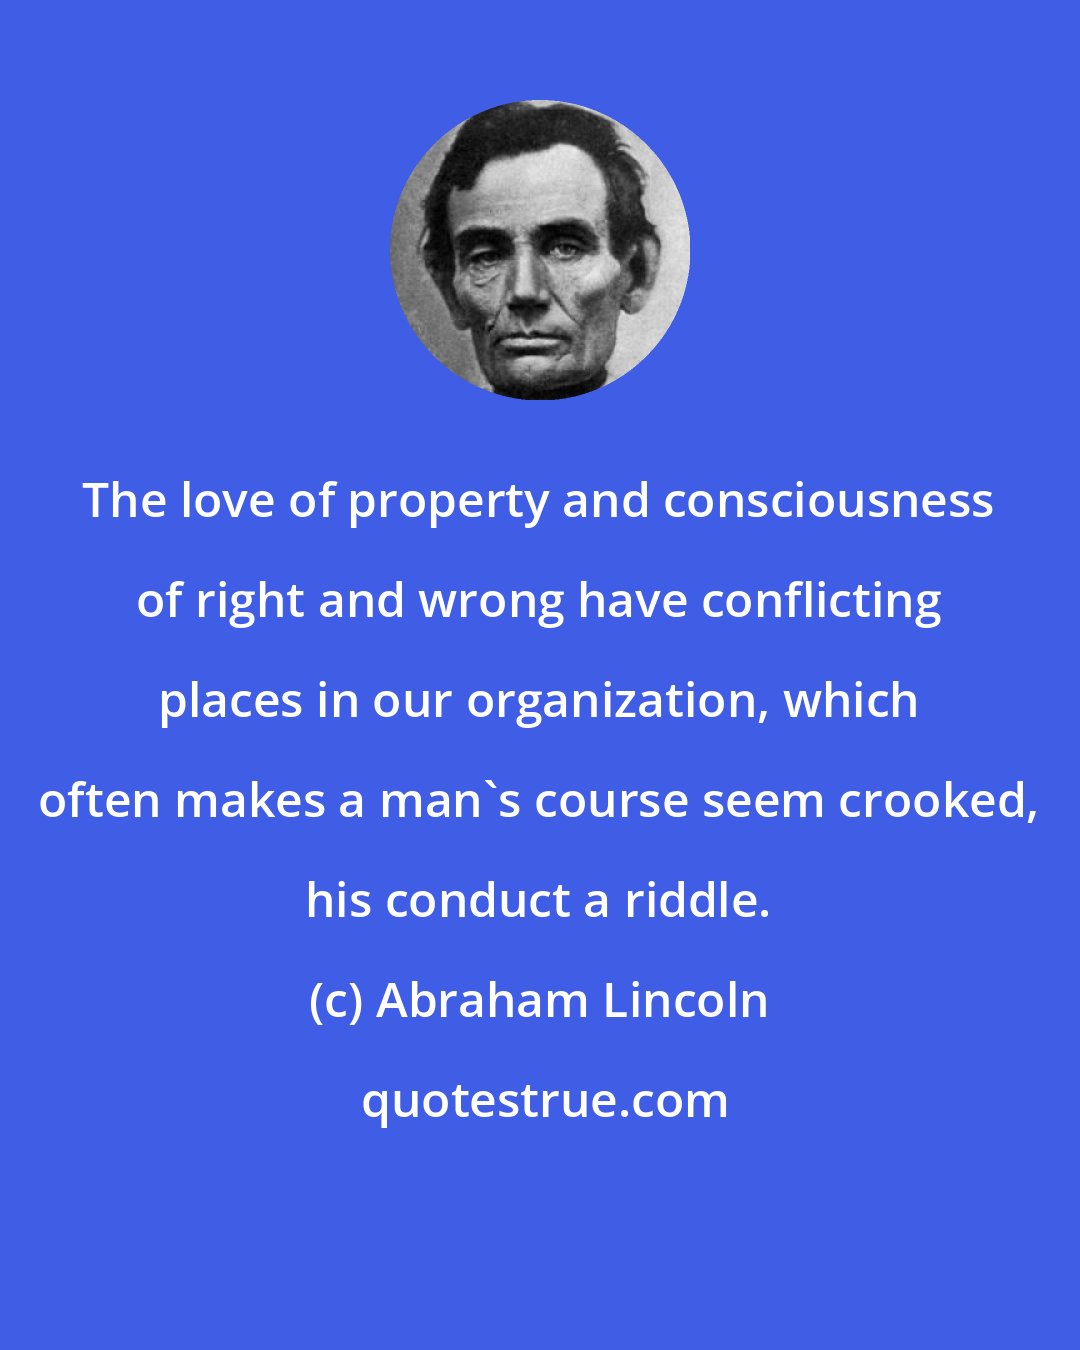 Abraham Lincoln: The love of property and consciousness of right and wrong have conflicting places in our organization, which often makes a man's course seem crooked, his conduct a riddle.